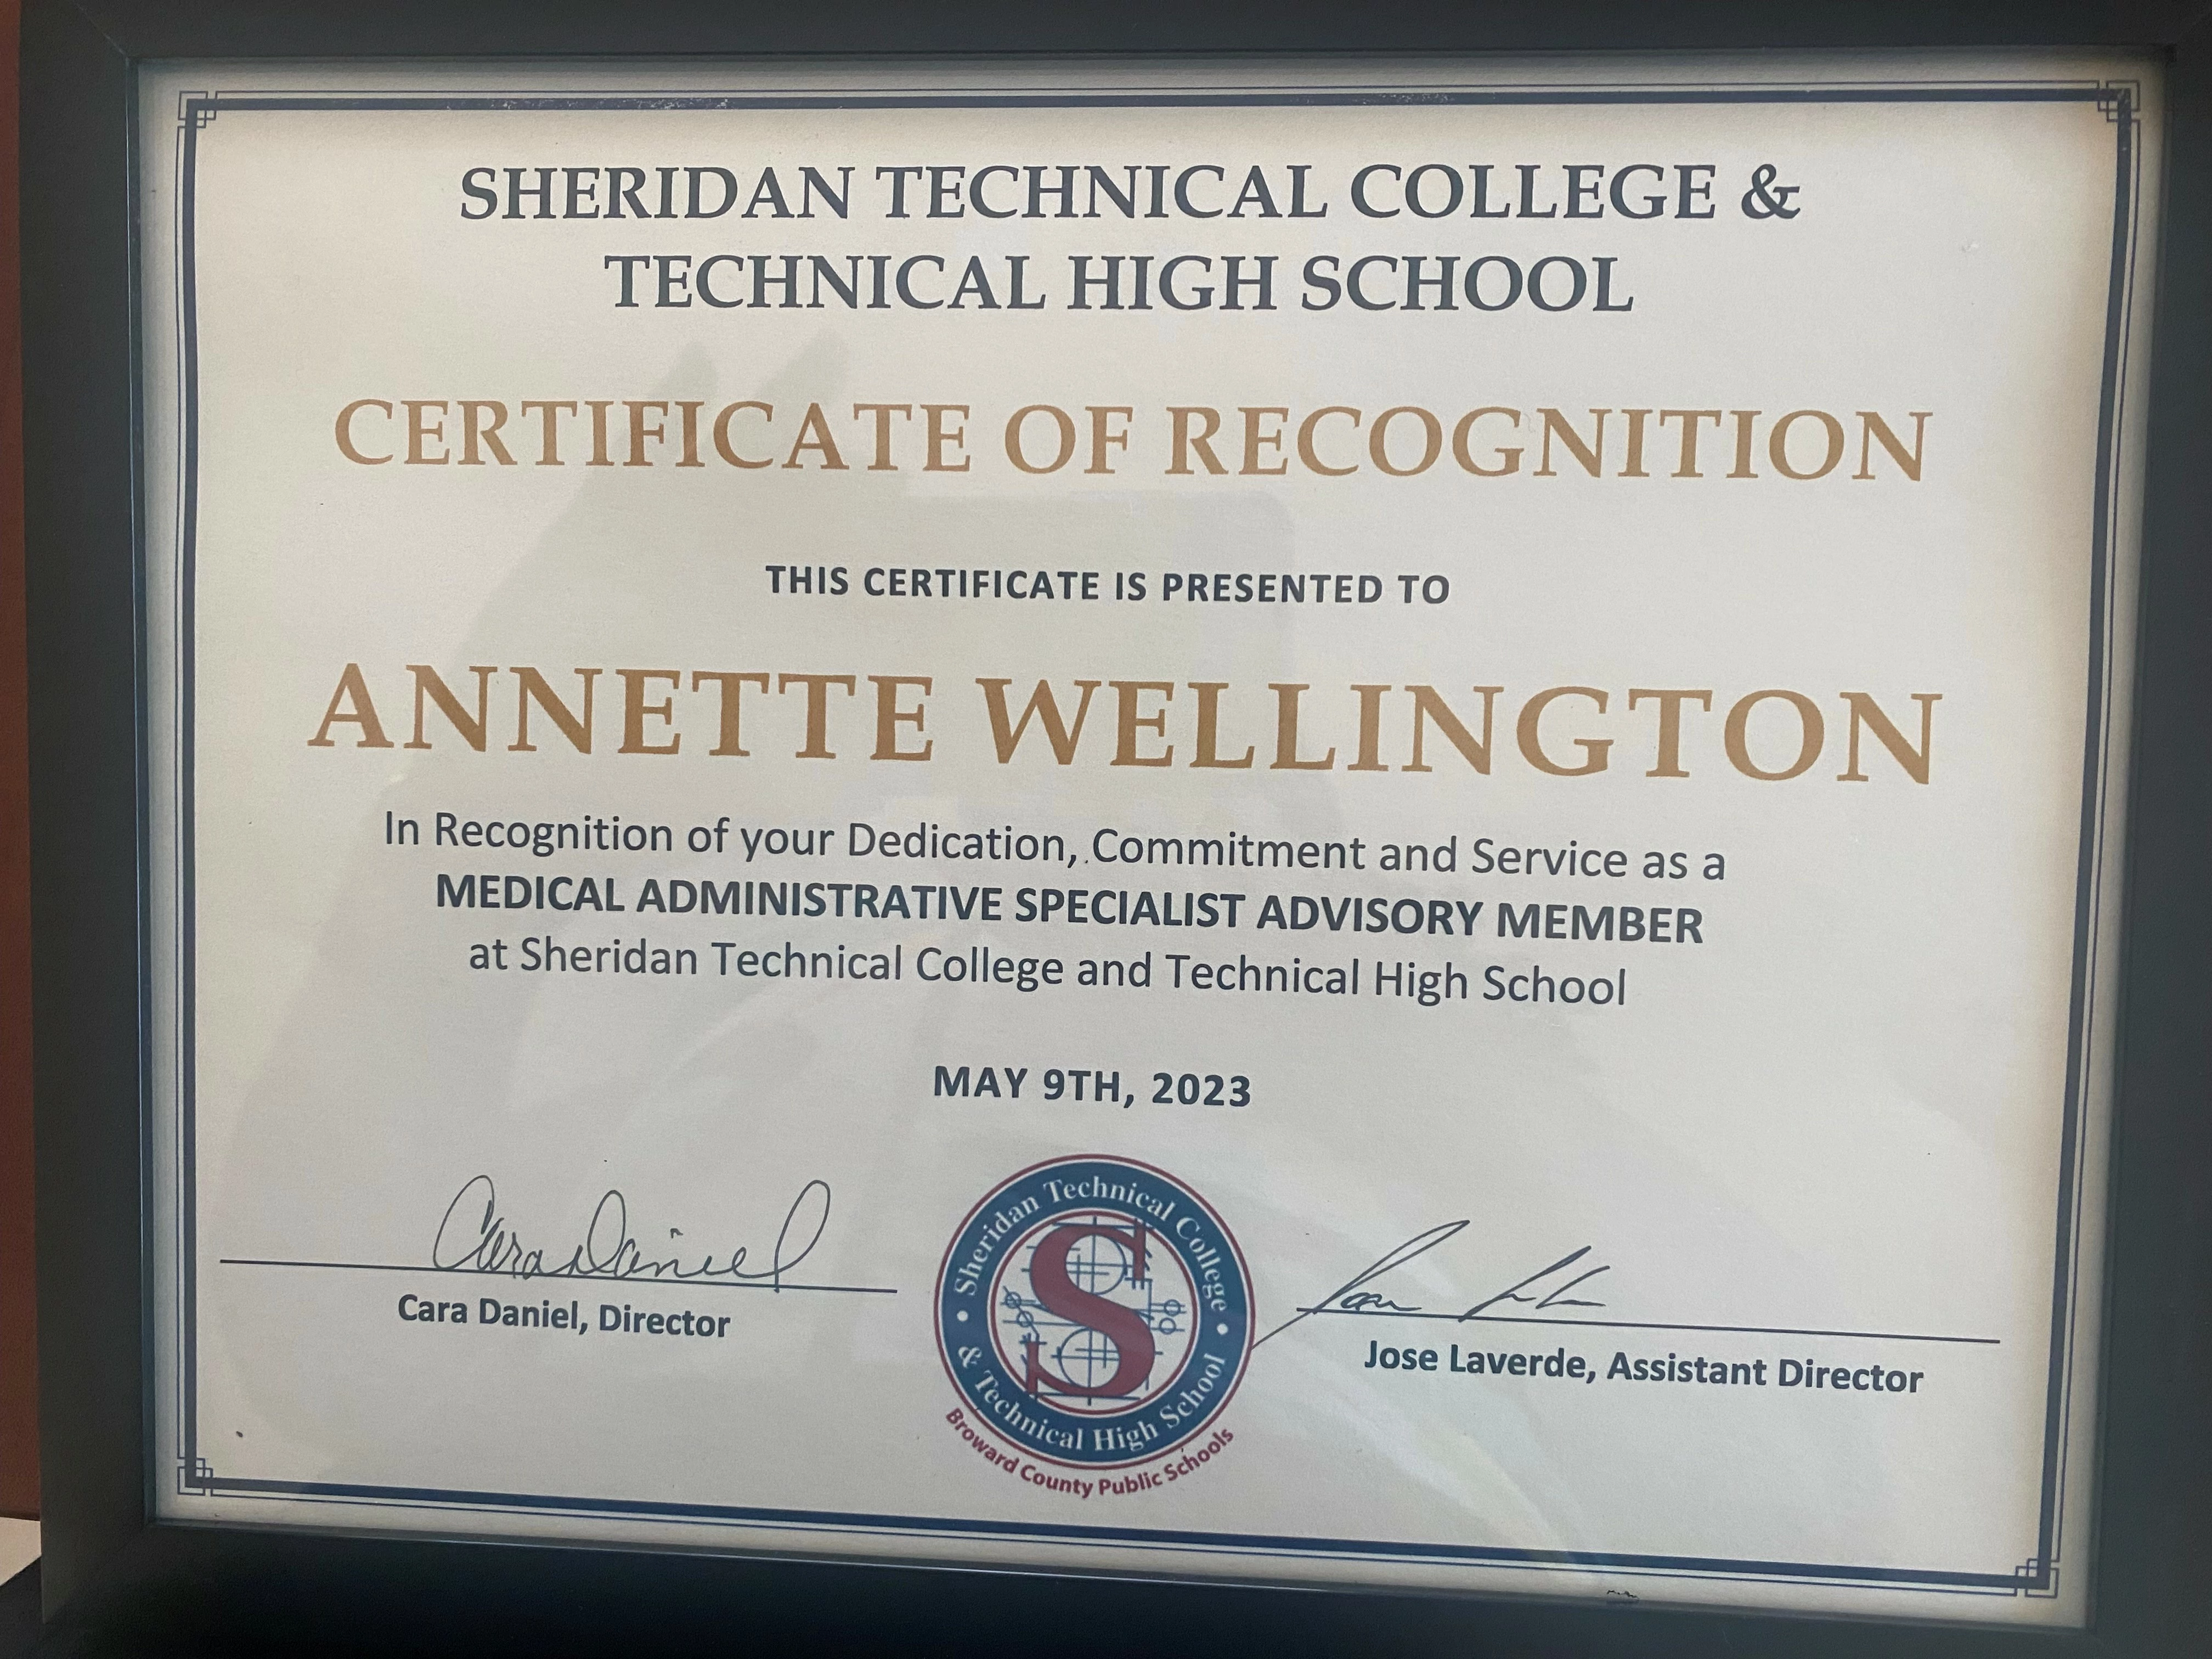 Annette Wellington, Certification of Recognition: Medical Administrative Specialist Advisory Member.